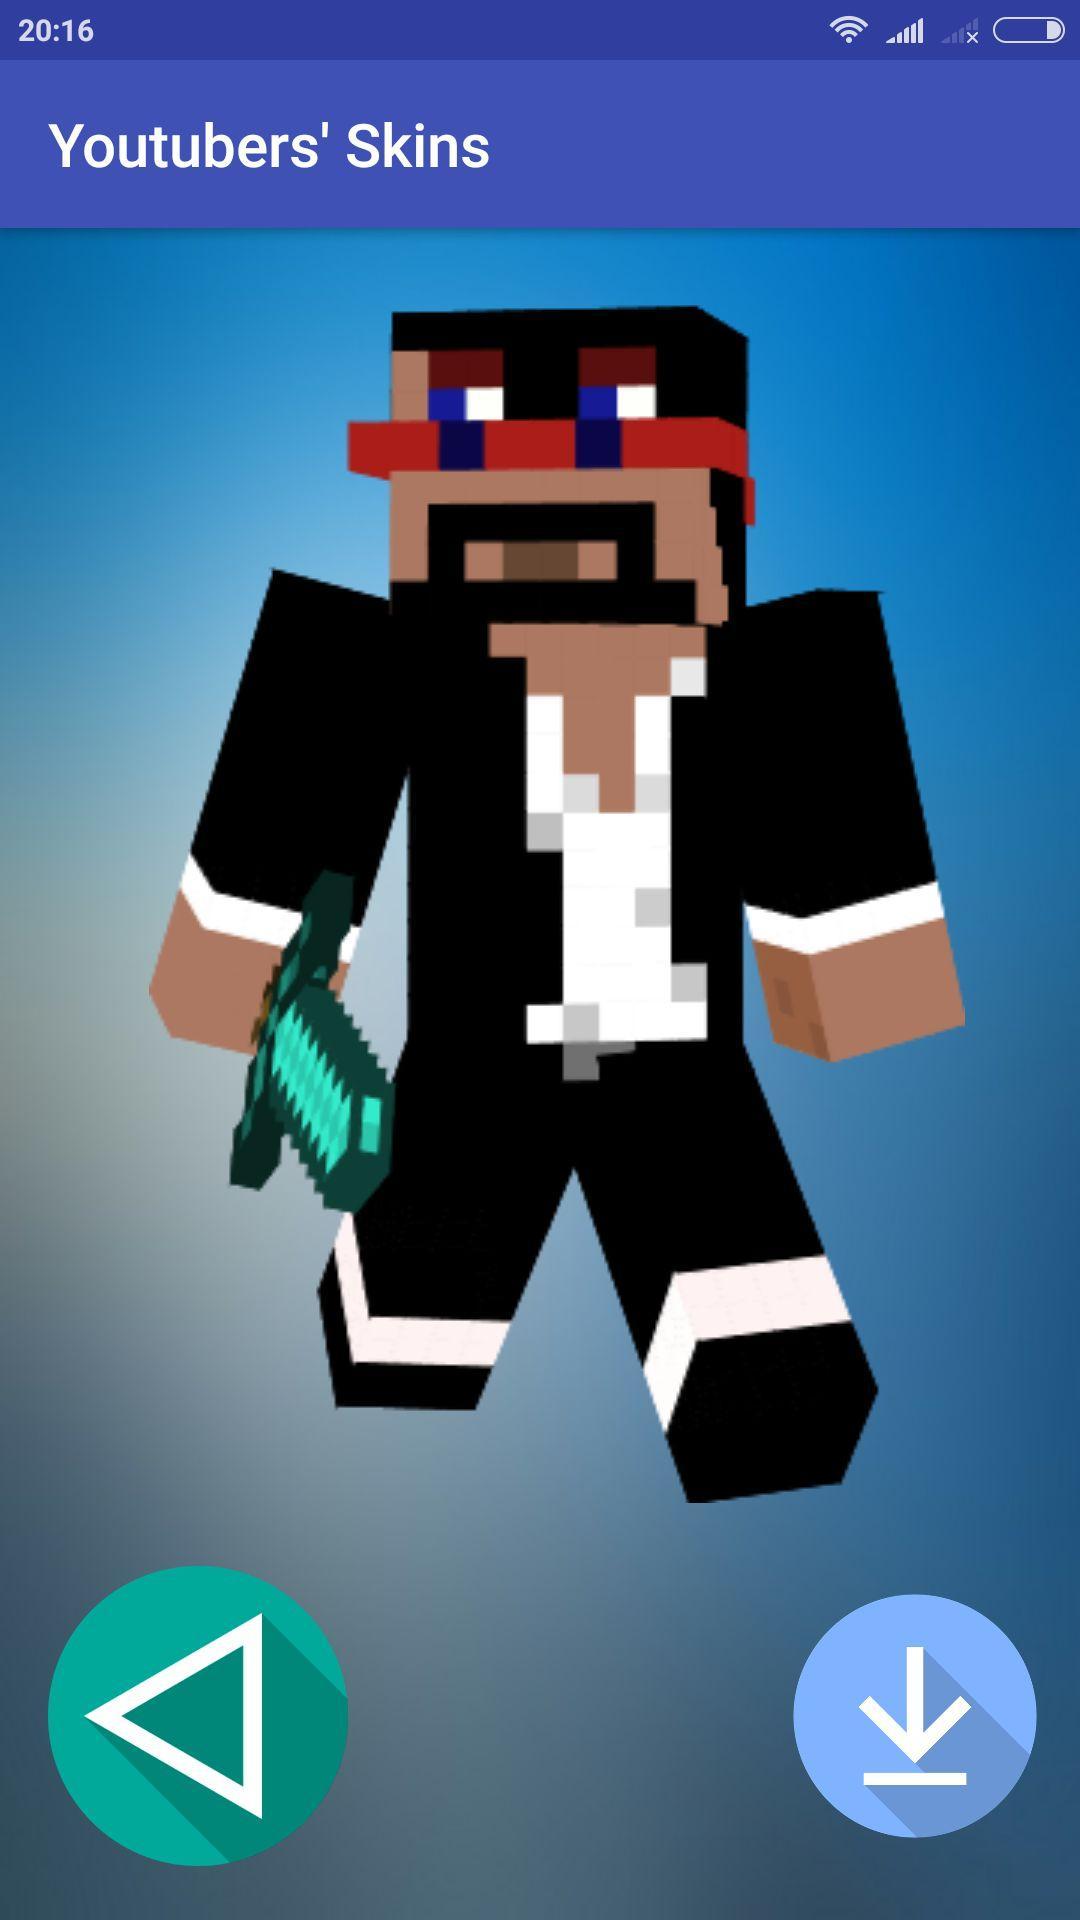 New Youtubers Skins For Minecraft Top Models For Android Apk